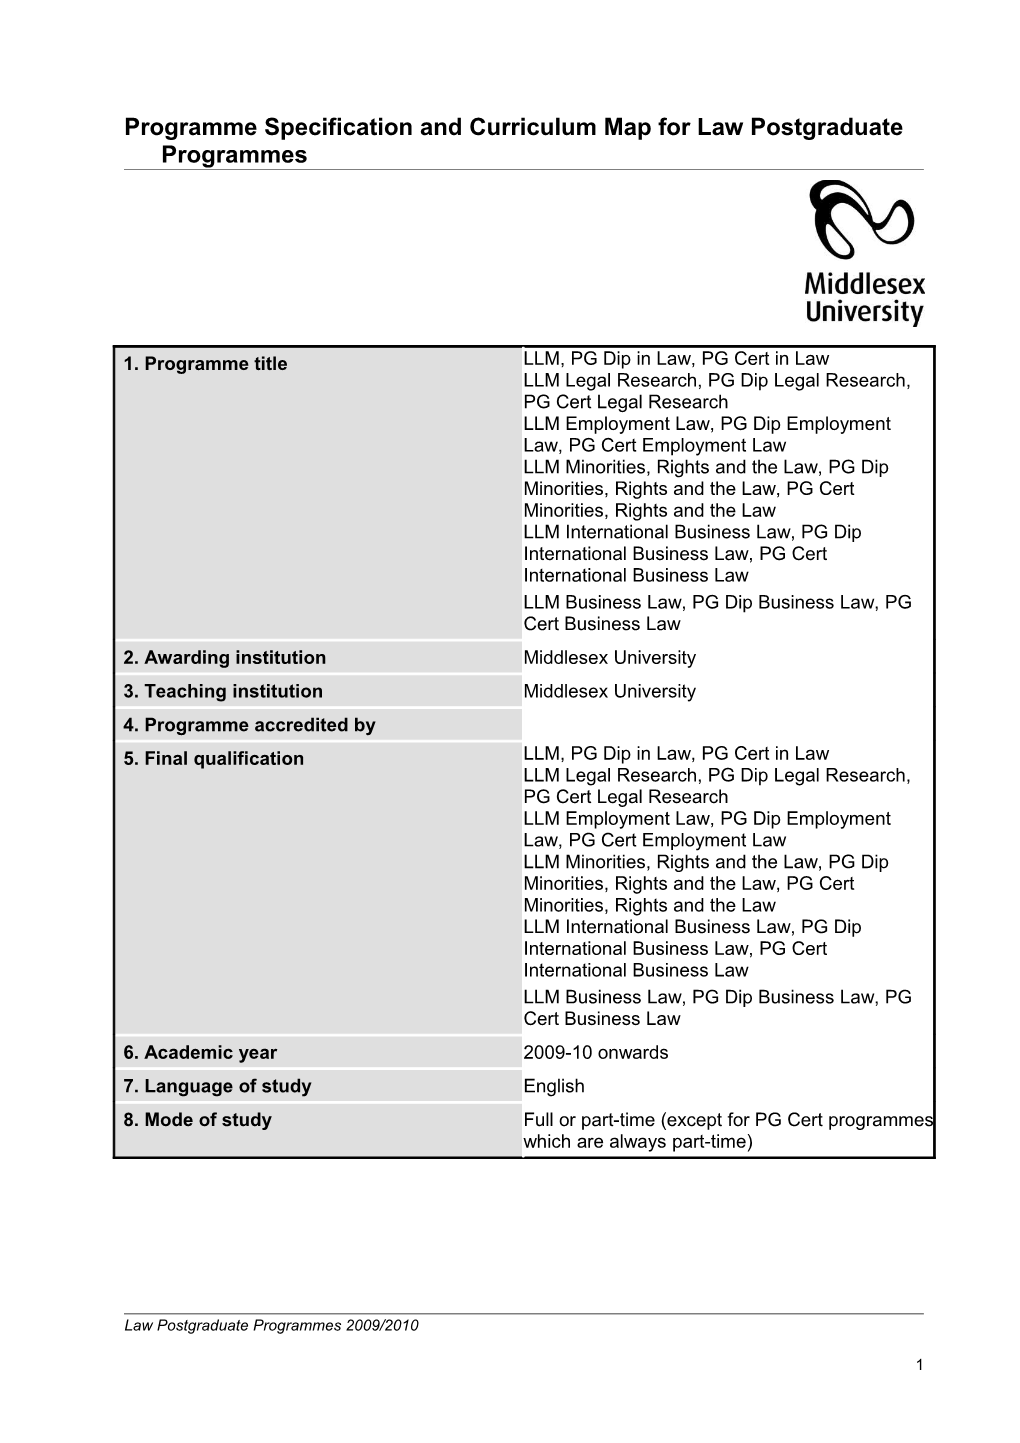 Programme Specification and Curriculum Map for Law Postgraduate Programmes